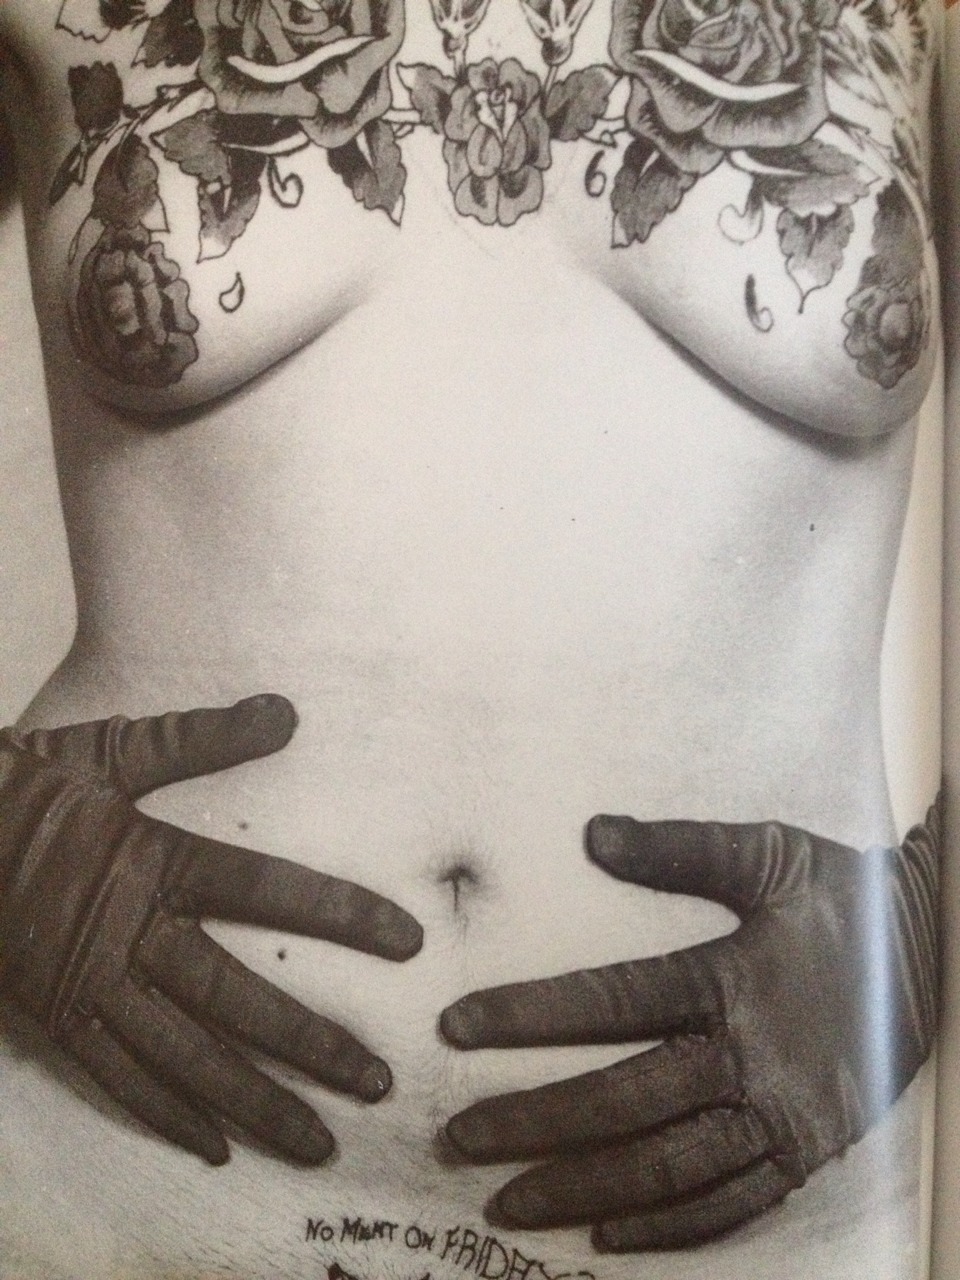 cherrie-o-baby:  My friends got me an awesome tattoo book as a present.